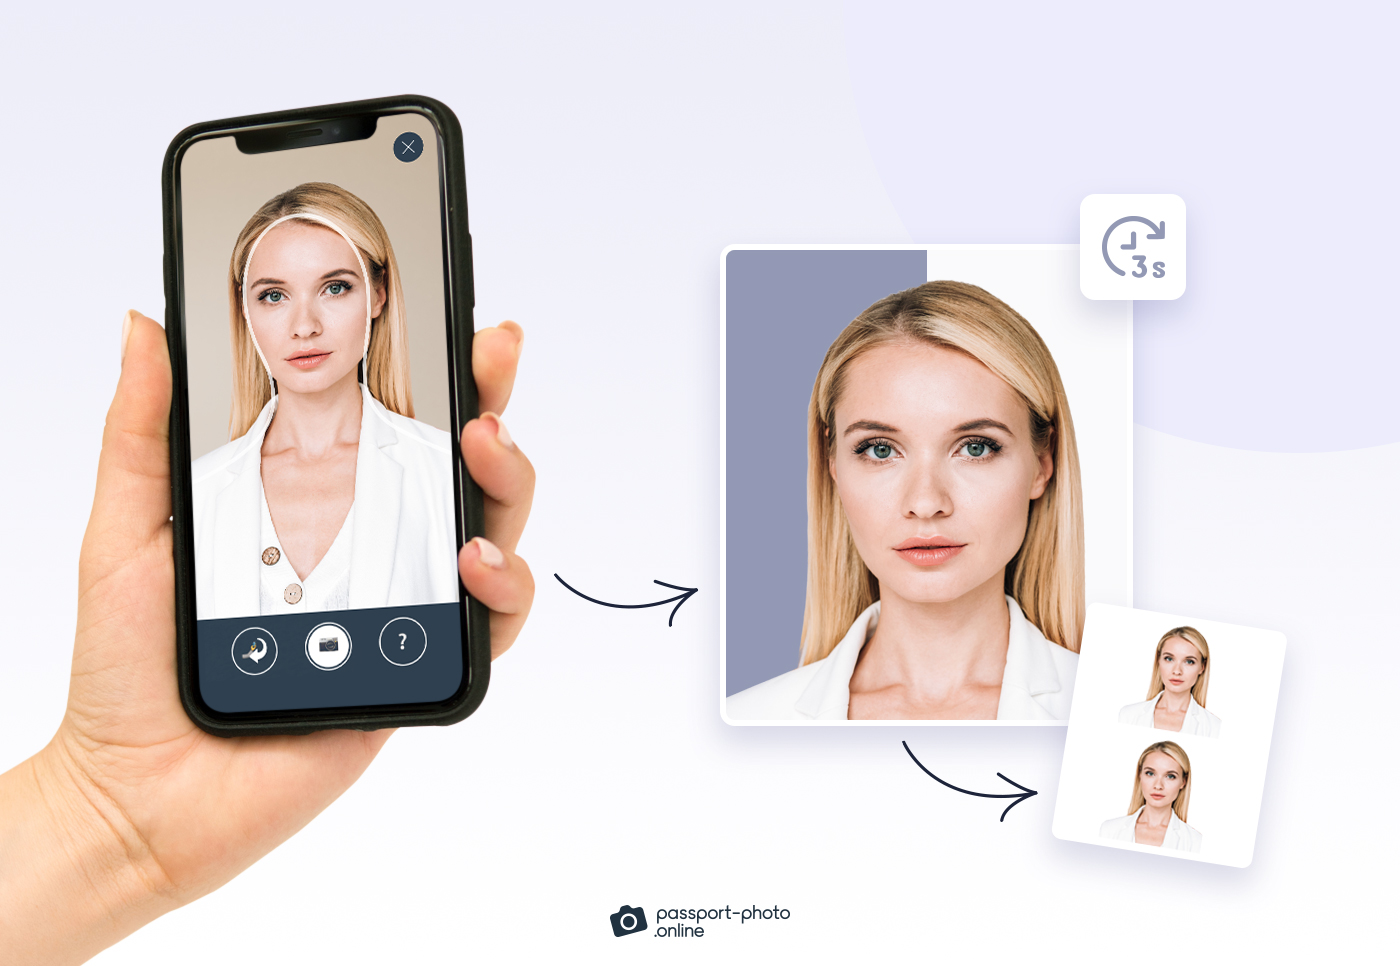 Get an instant $3 passport photo coupon using Passport Photo Online instead of getting your pictures at a national pharmacy chain.